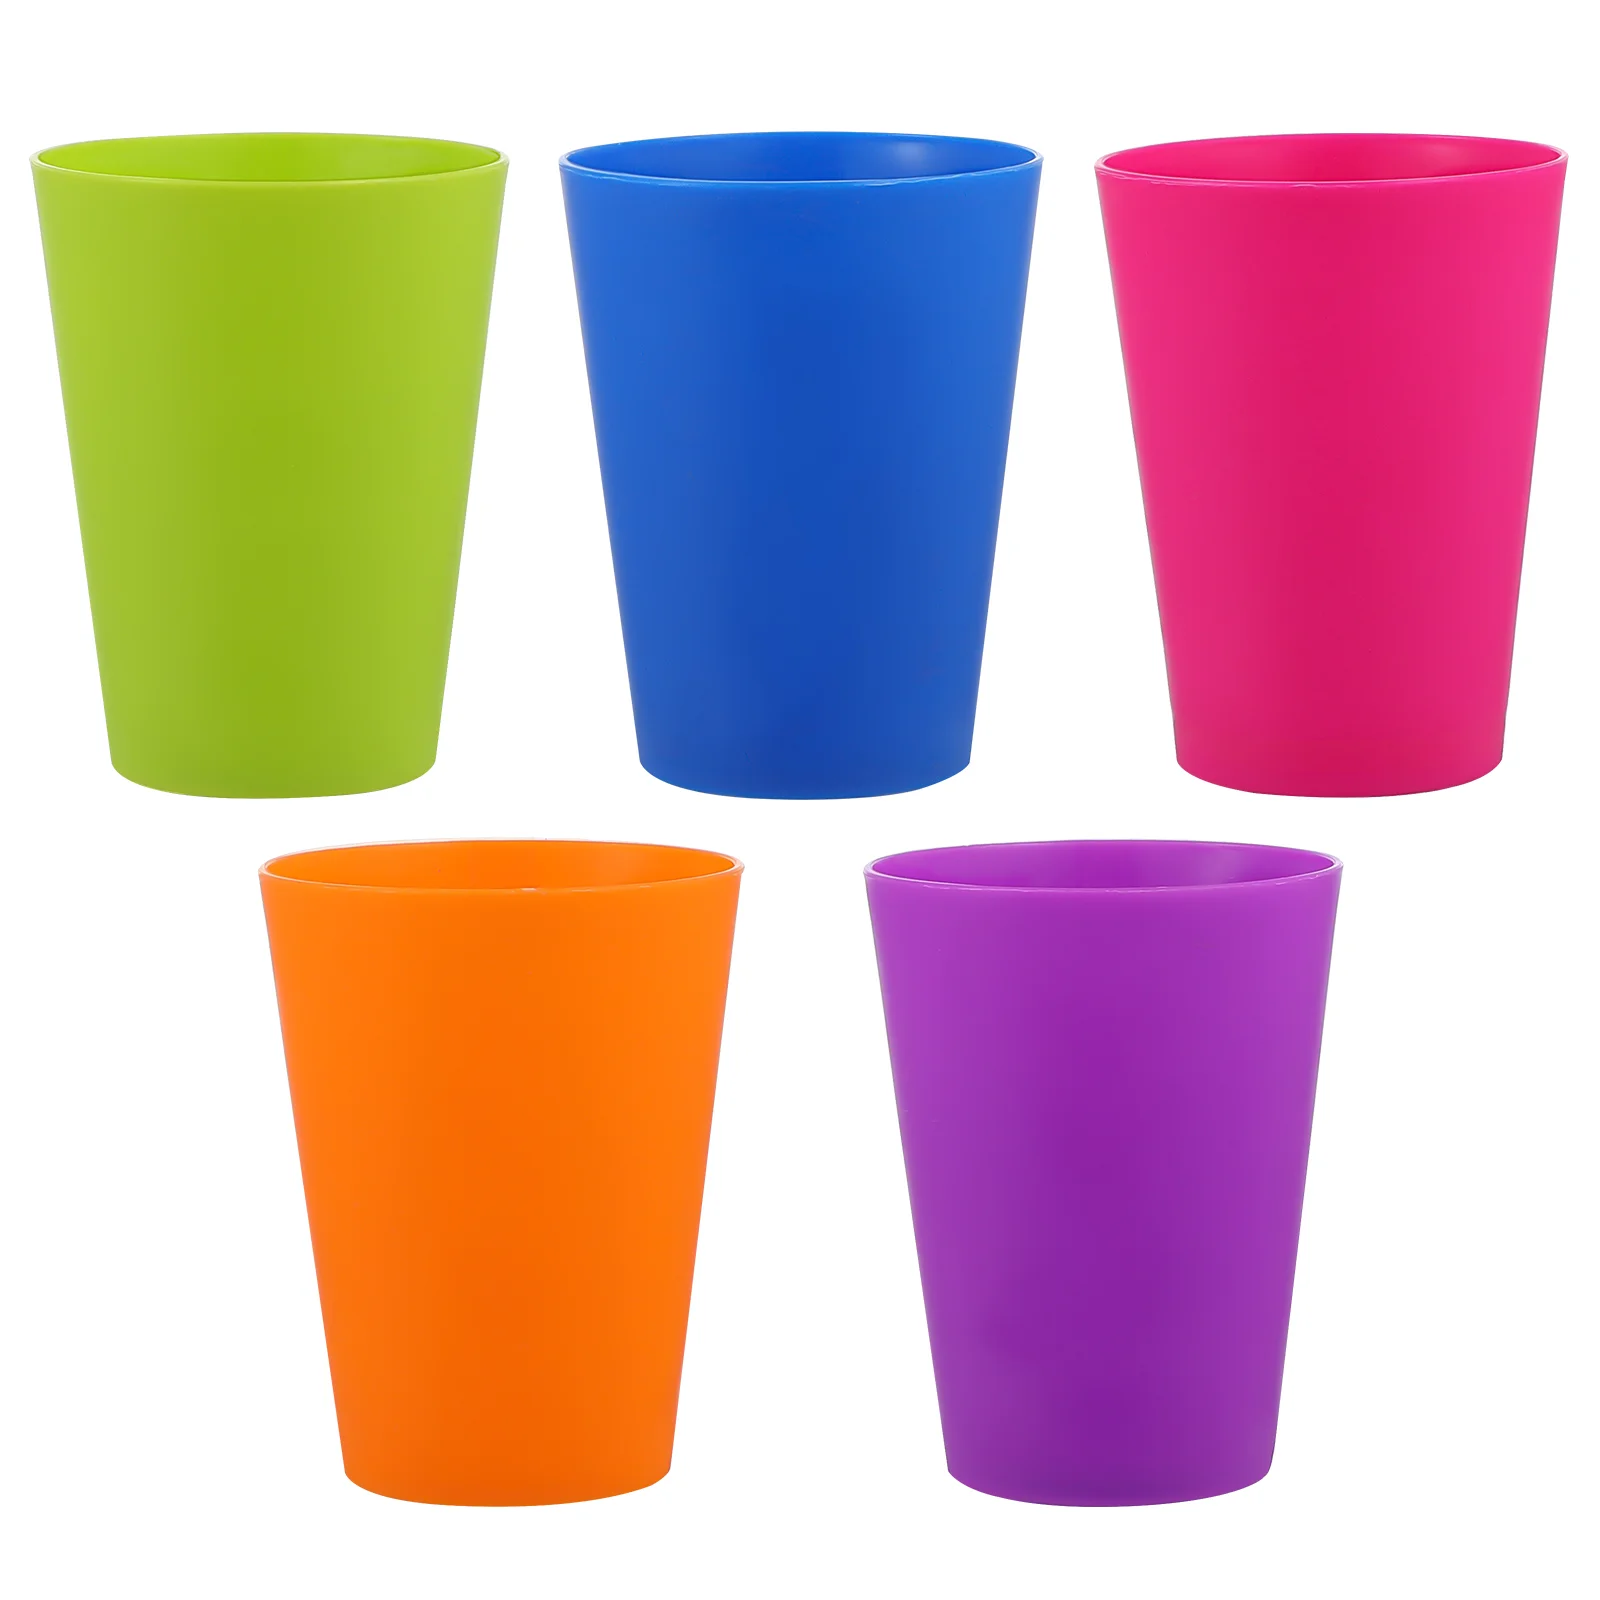 

Kids Cups Colored Plastic Cups Tumblers Kids Plastic Cups Reusable Glass Tumblers Drinking Glasses Multicolor Beverage Cups